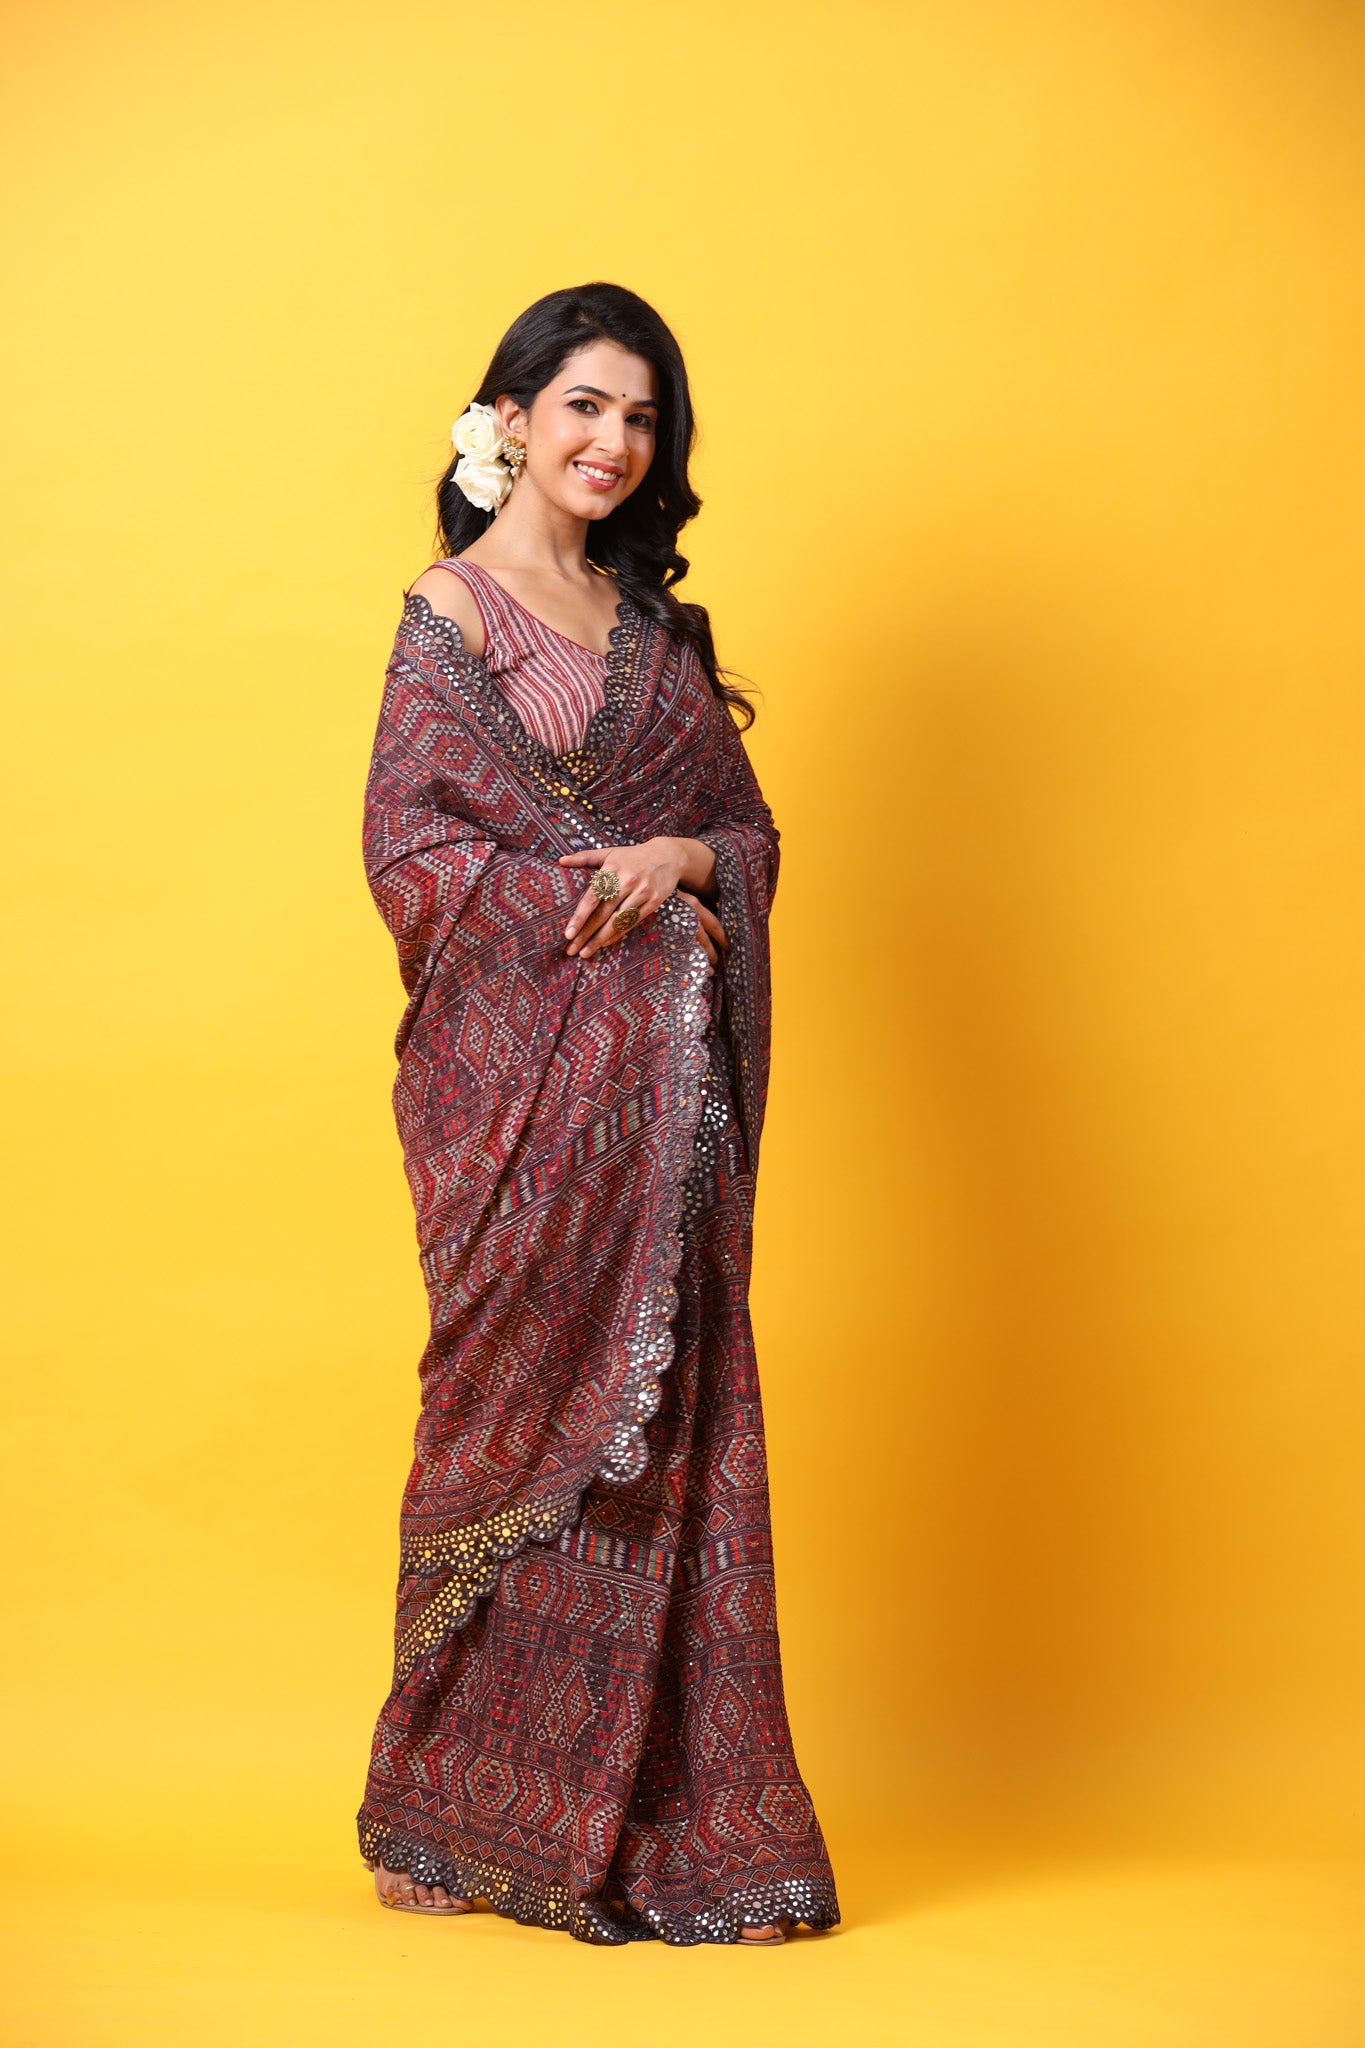 Buy multicolor printed georgette saree online in USA with scalloped border. Make a fashion statement at weddings with stunning designer sarees, embroidered sarees with blouse, wedding sarees, handloom sarees from Pure Elegance Indian fashion store in USA.-side